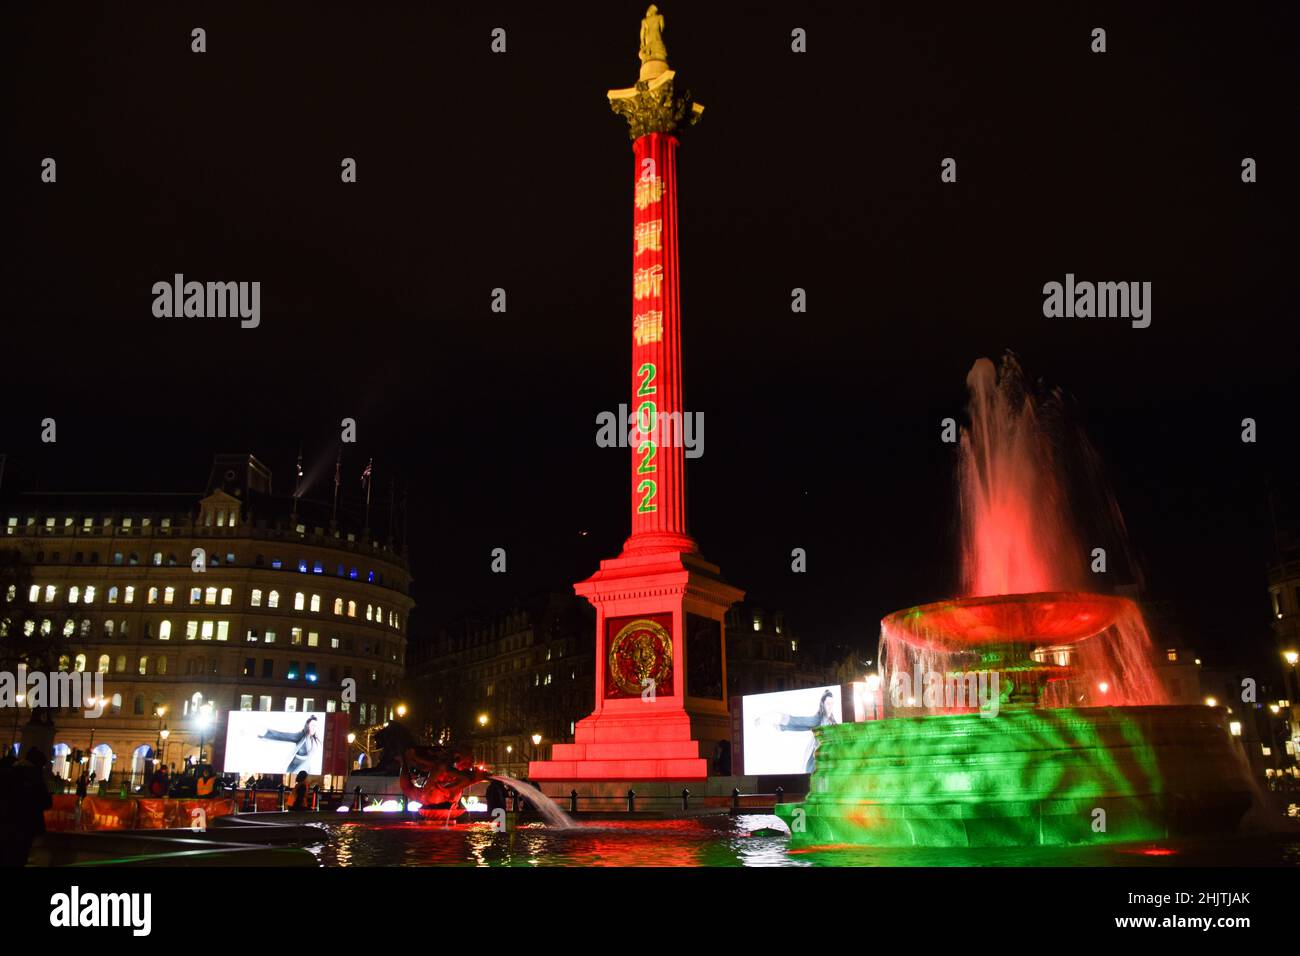 London, UK 31st January 2022. '2022' is projected onto Nelson's Column in Trafalgar Square in celebration of Chinese New Year. This year marks the Year of the Tiger. Credit: Vuk Valcic / Alamy Live News Stock Photo